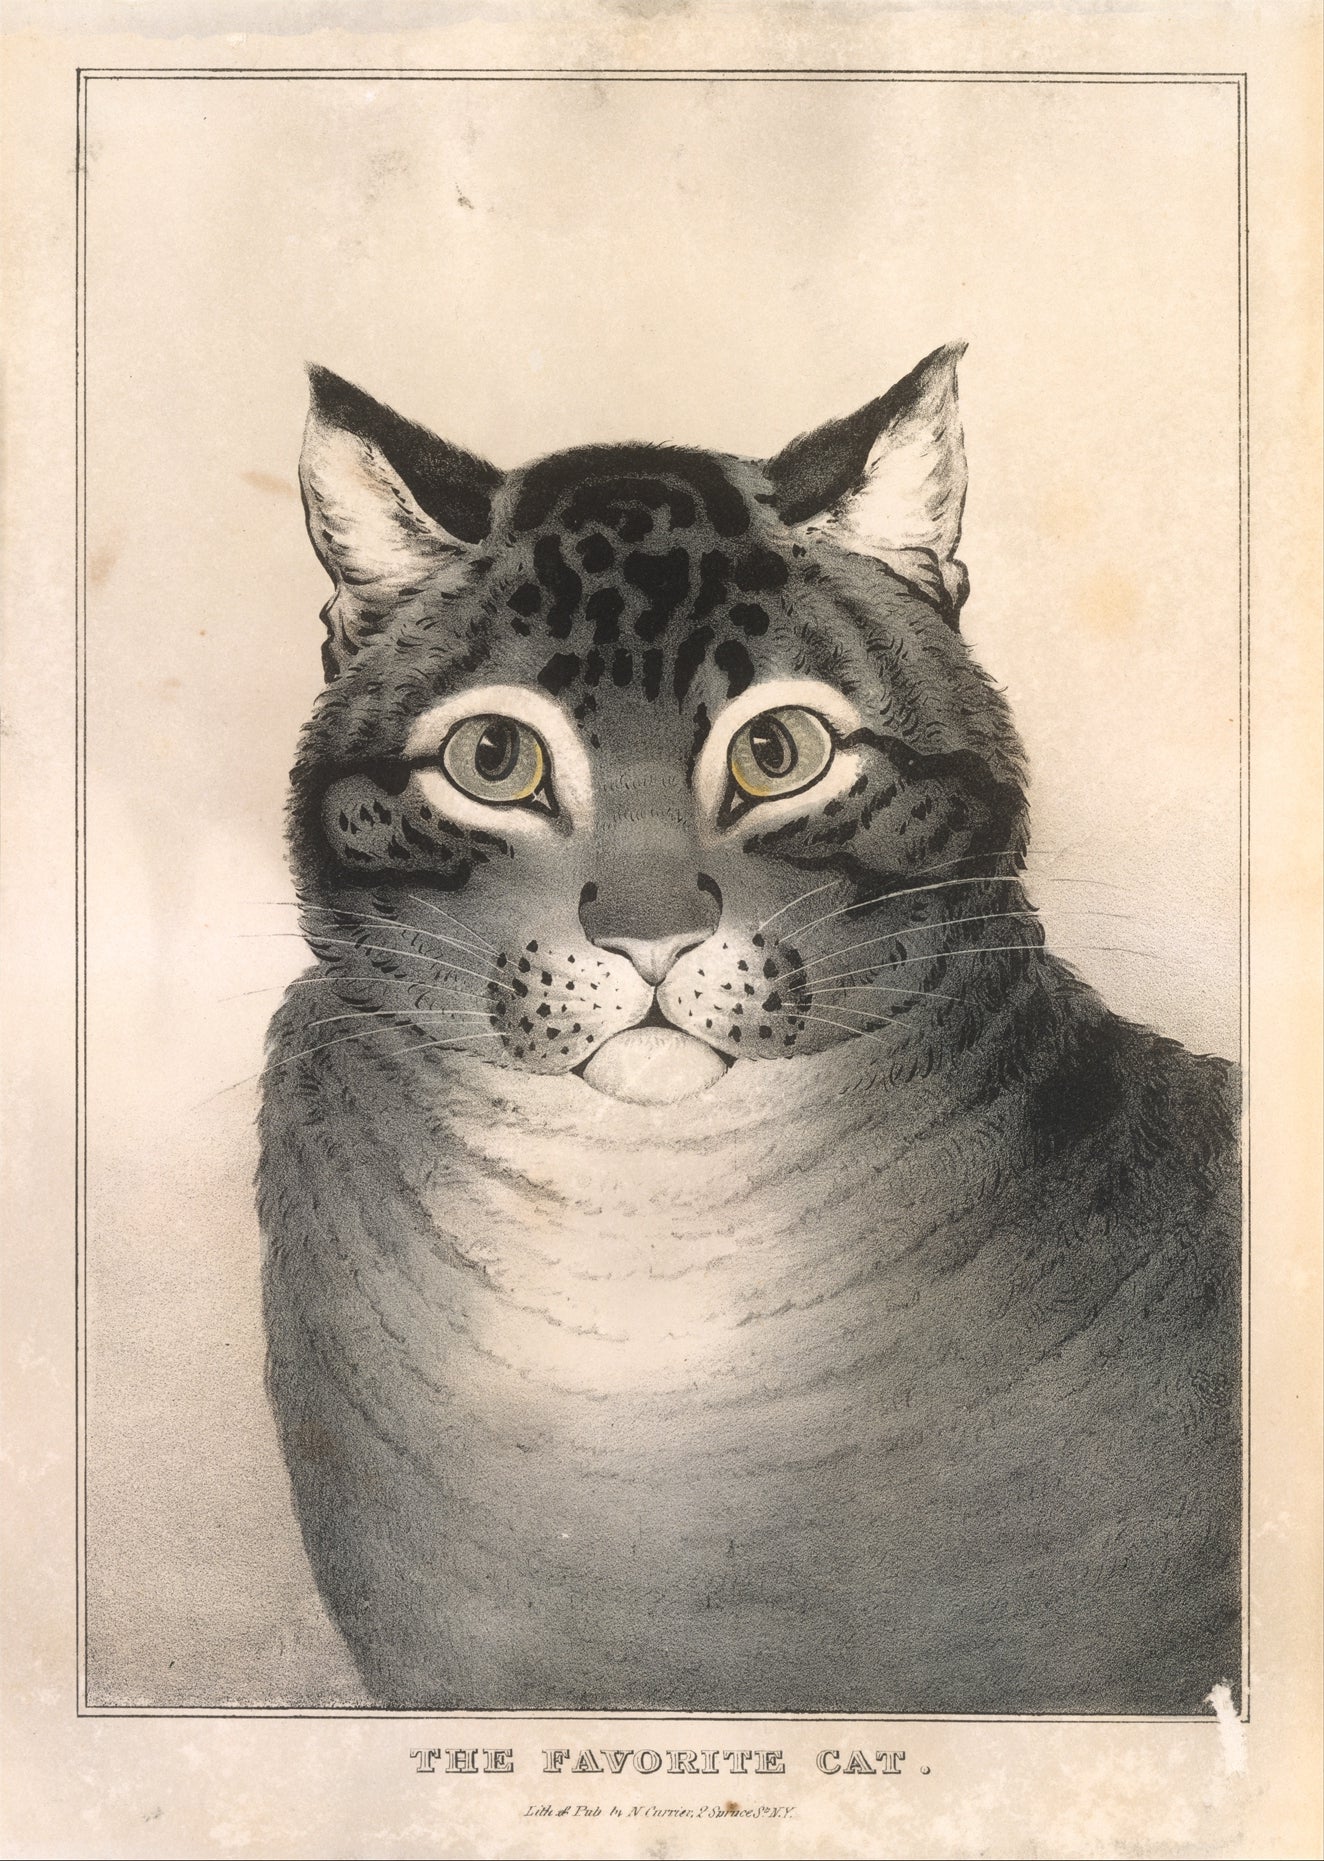 The favorite cat - Lithographed and published by Nathaniel Currier, 1838